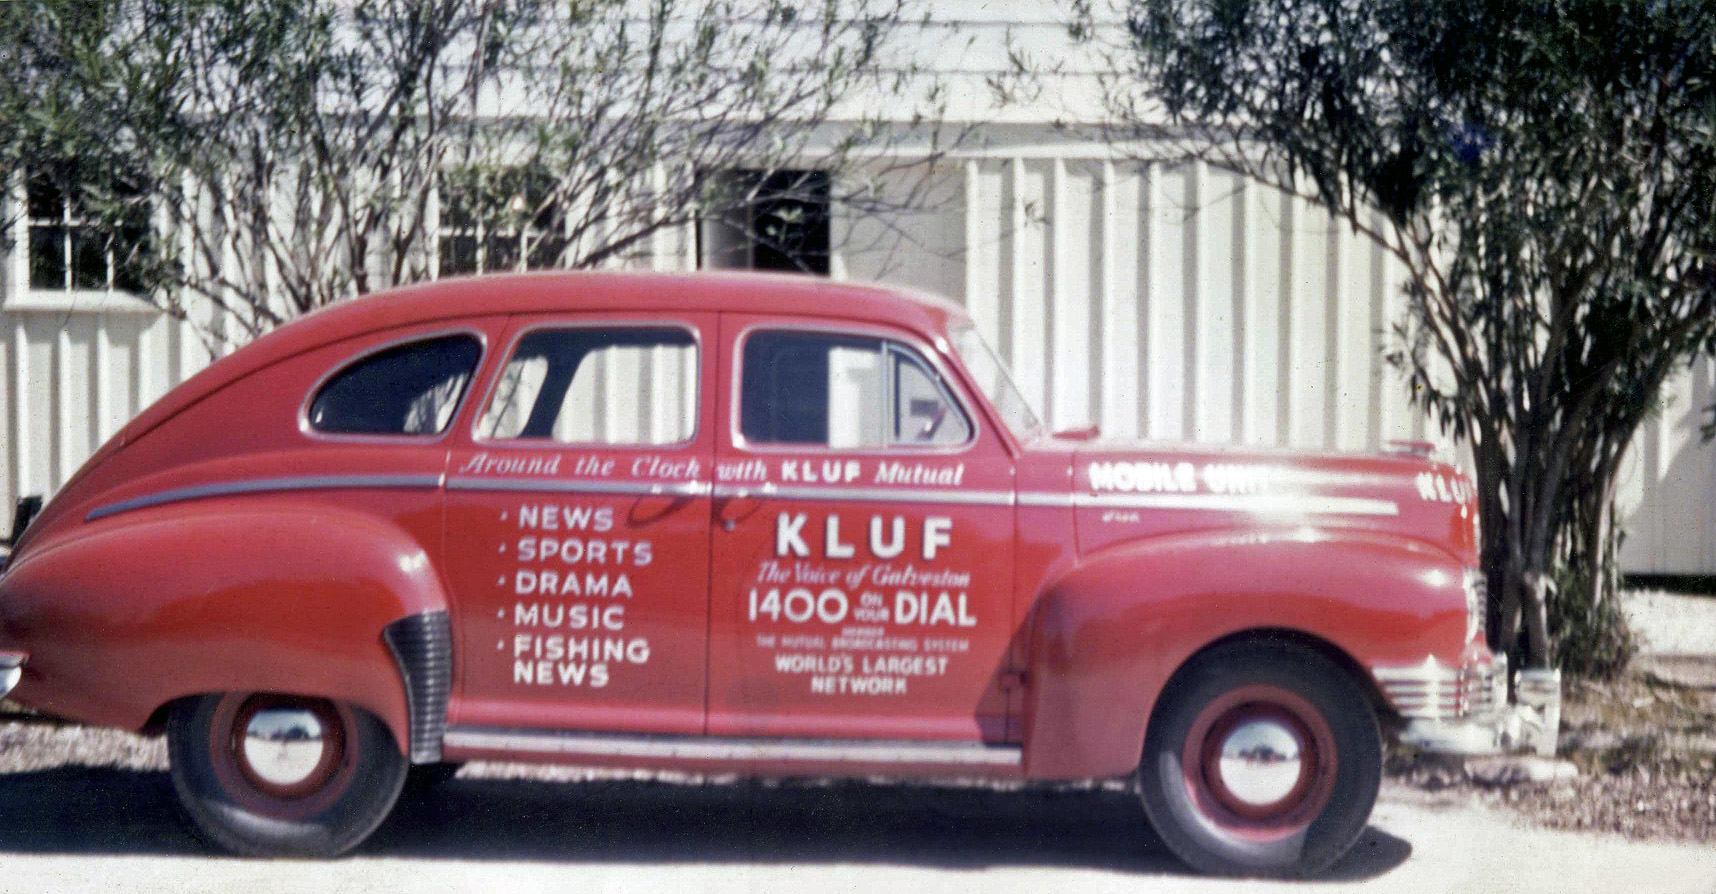 The station car of radio station KLUF in Galveston, Texas. My grandfather, George Roy Clough, founded the station in 1920. He made this photograph. View full size.